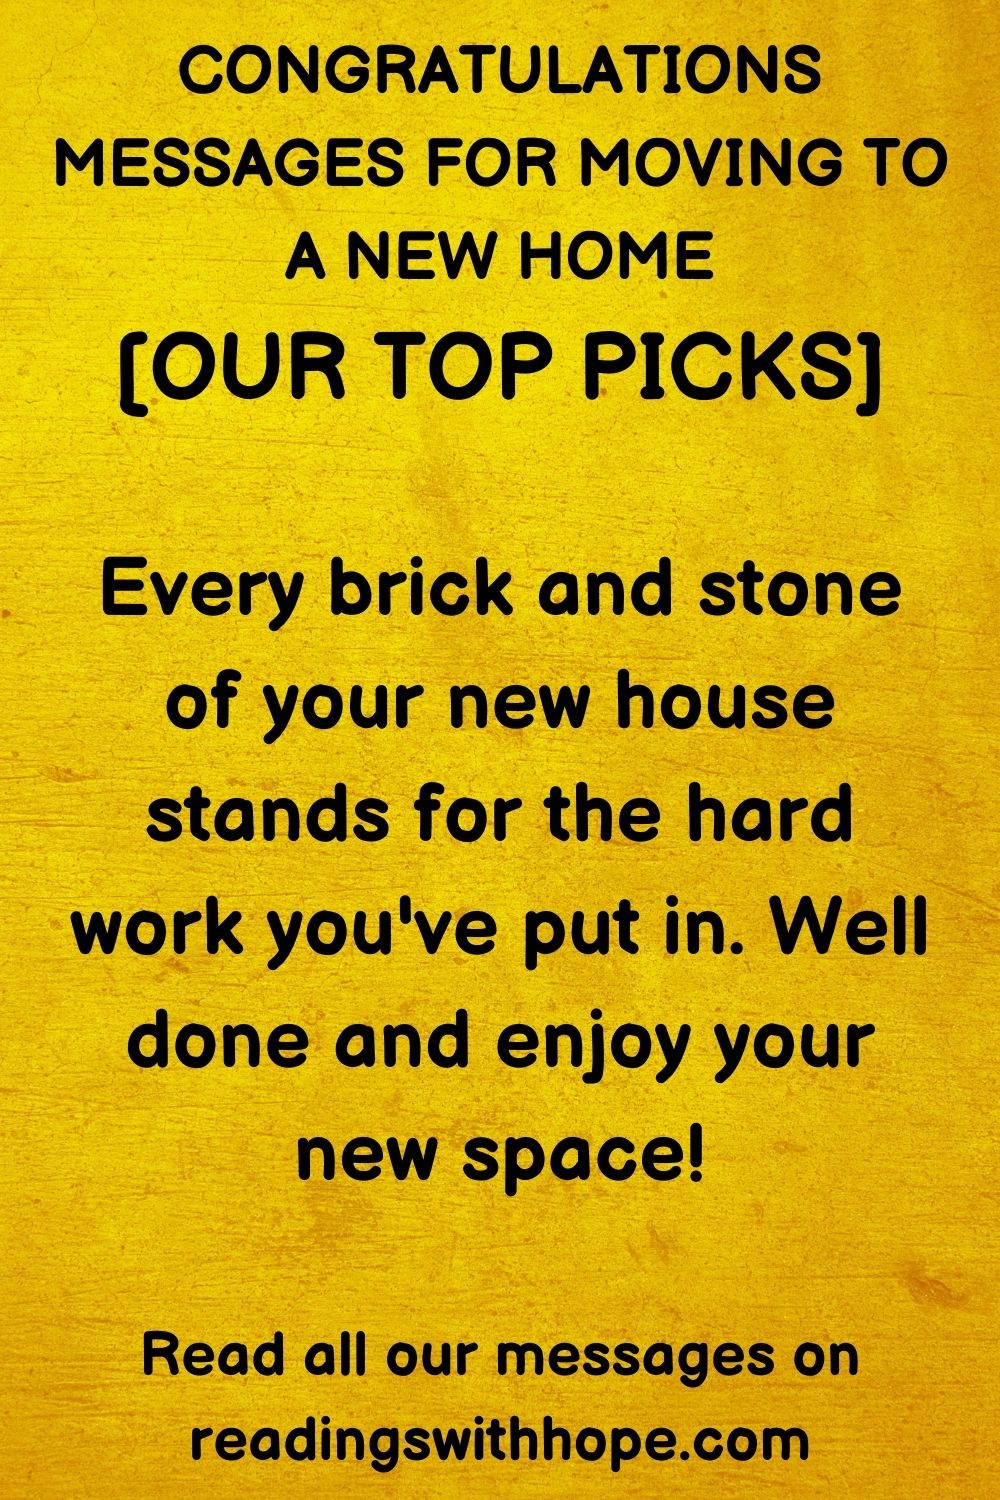 congratulations message for moving to a new home that says Every brick and stone of your new house stands for the hard work you've put in. Well done and enjoy your new space!